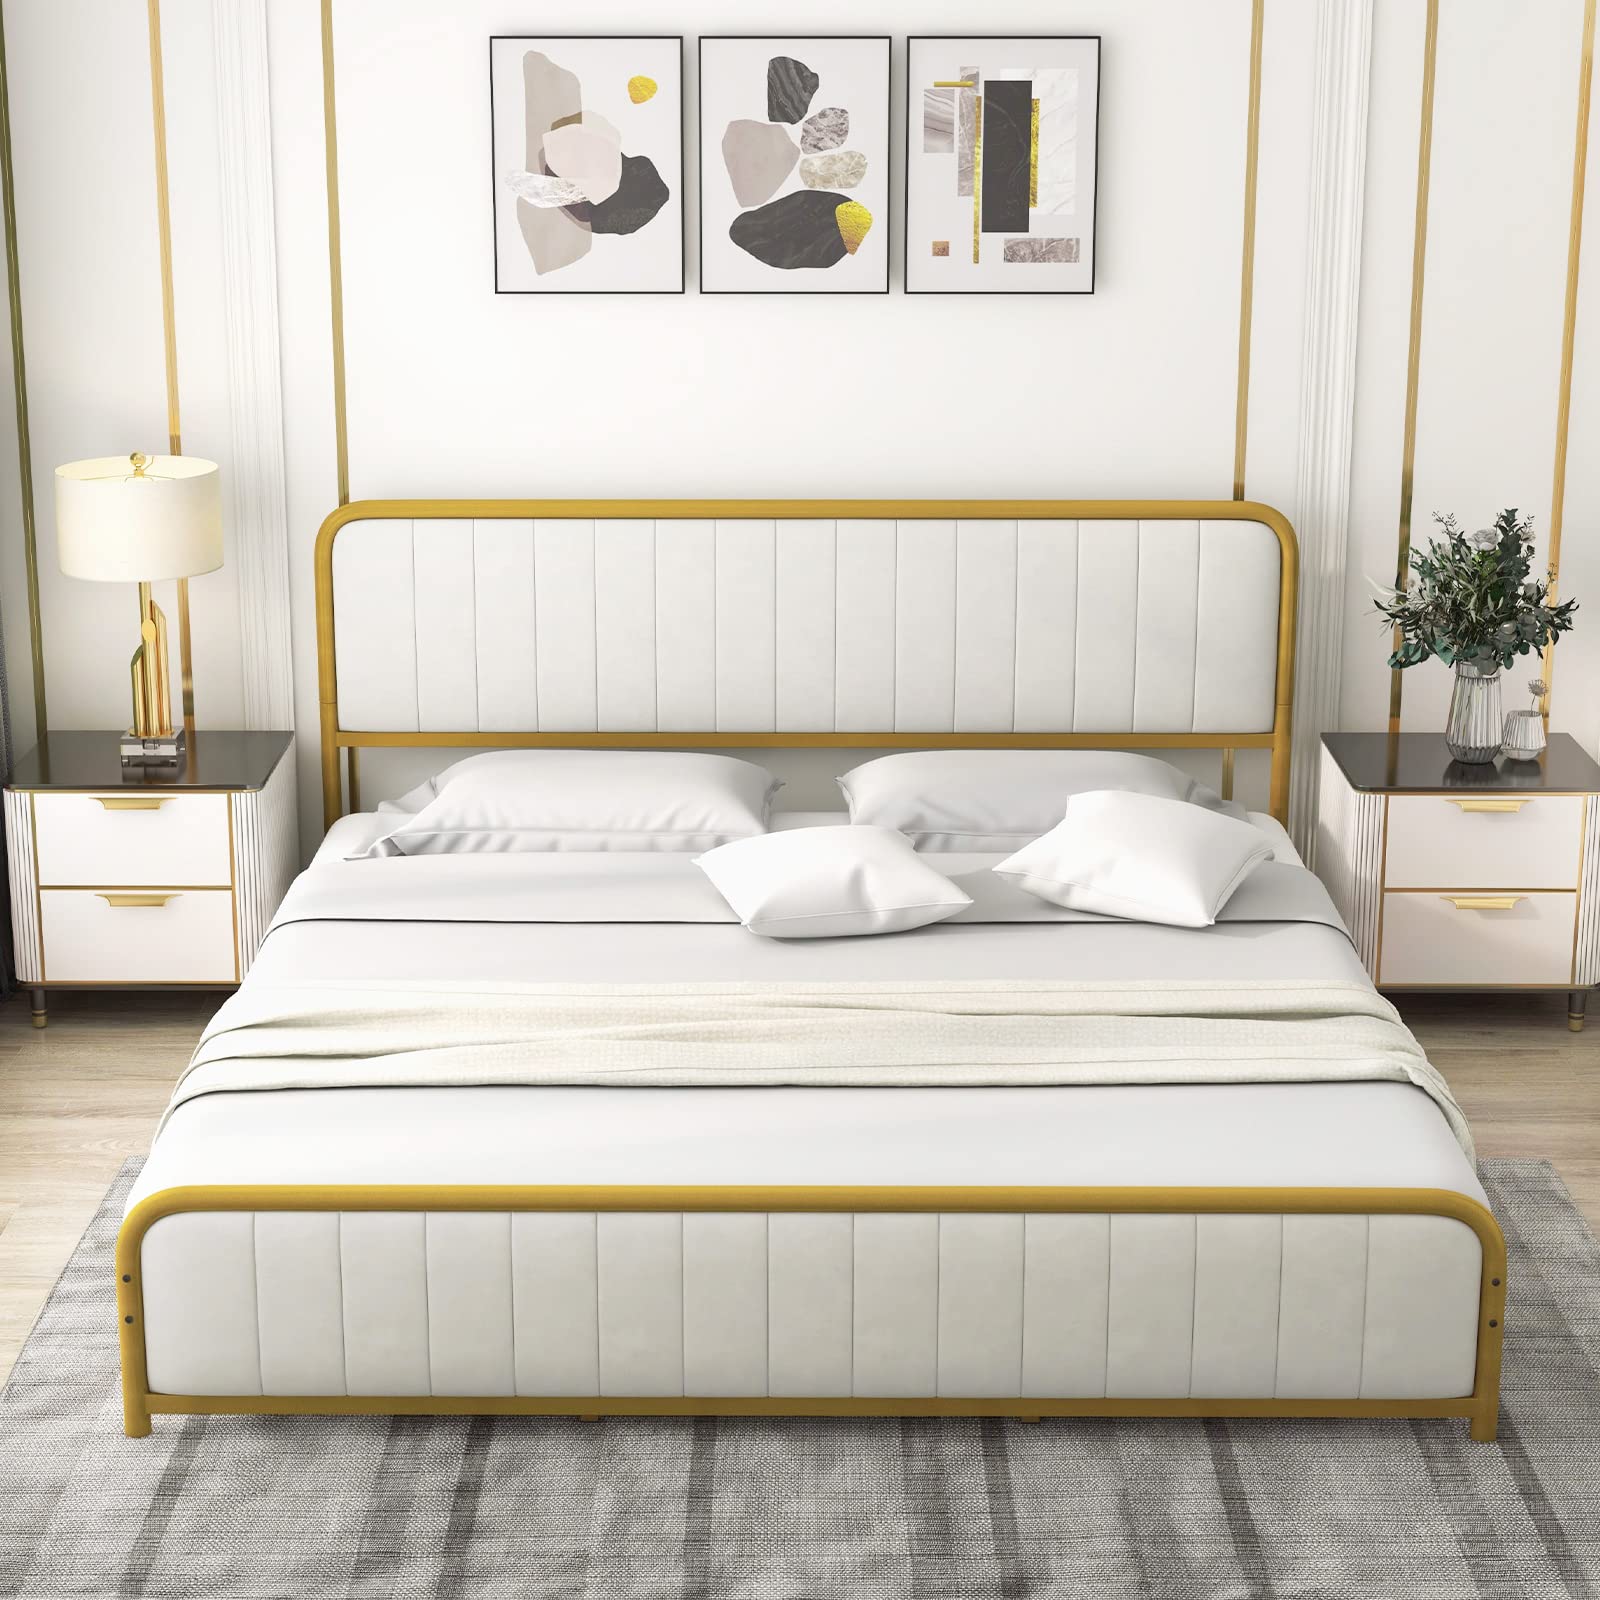 Giantex Twin Size Gold Bed Frame with Velvet Headboard and Footboard, Heavy-duty Metal Slats Support Mattress Foundation